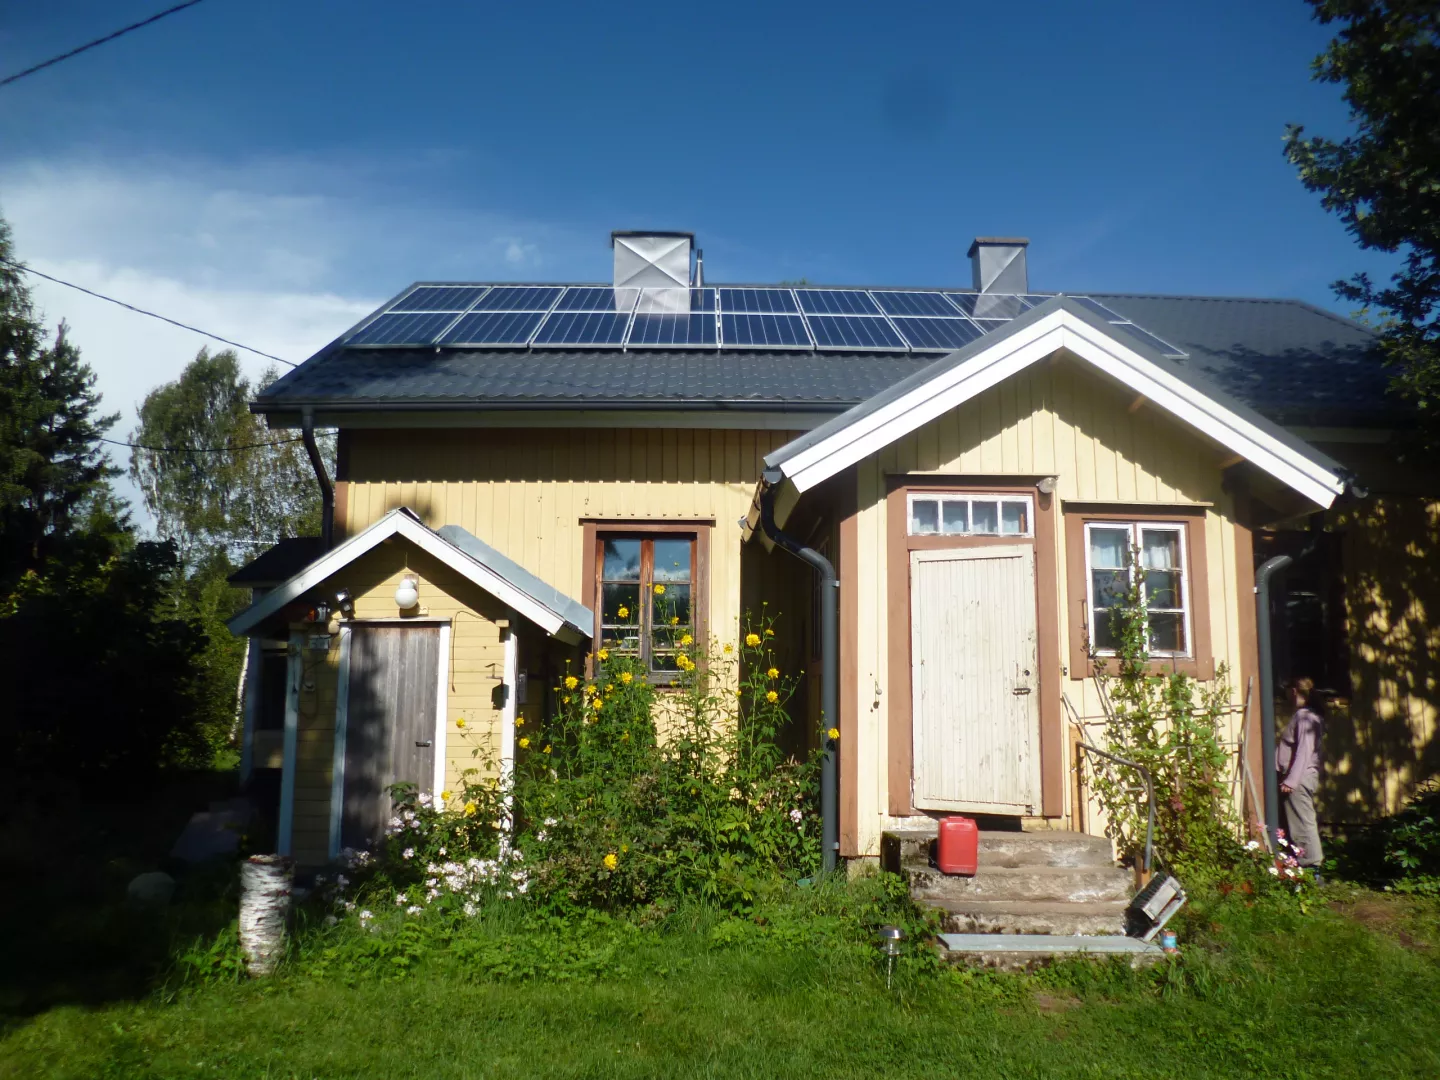 Newly installed PV system in Finland